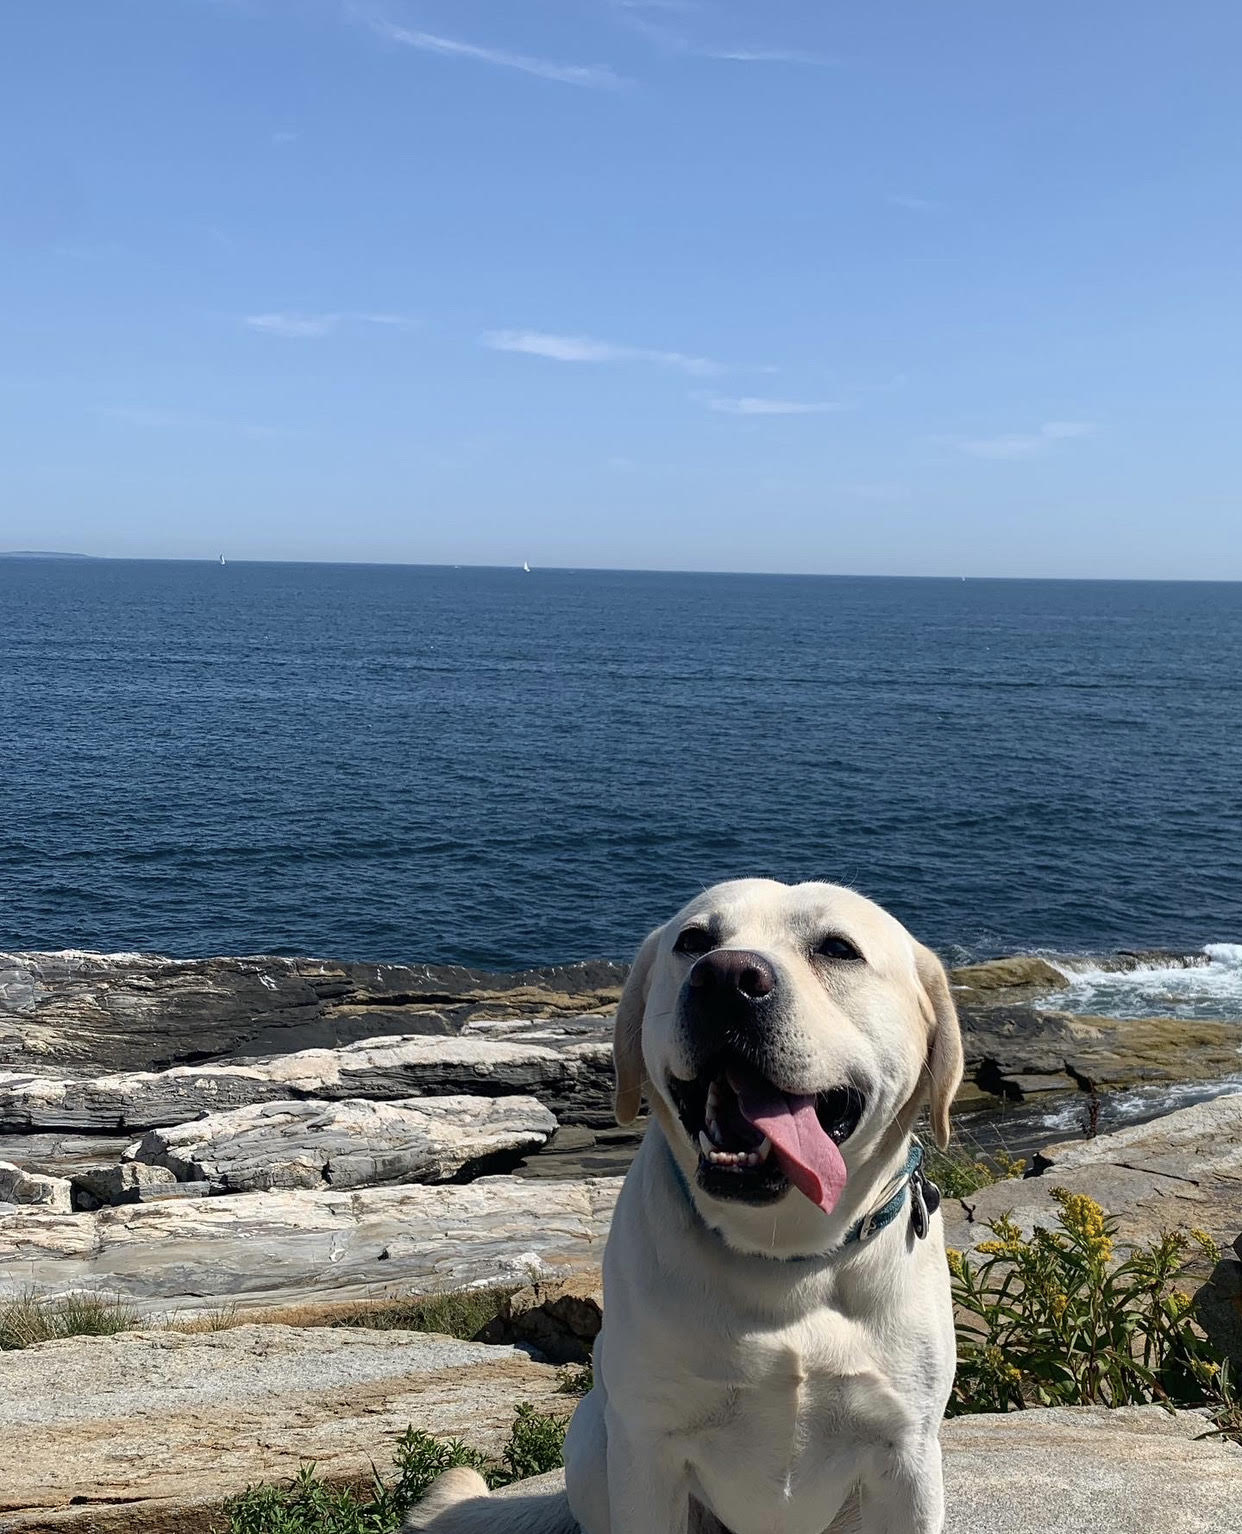 Teddy the yellow Labrador Retriever sitting on rocky terrain with a large body of water behind him. His tongue is sticking out.  